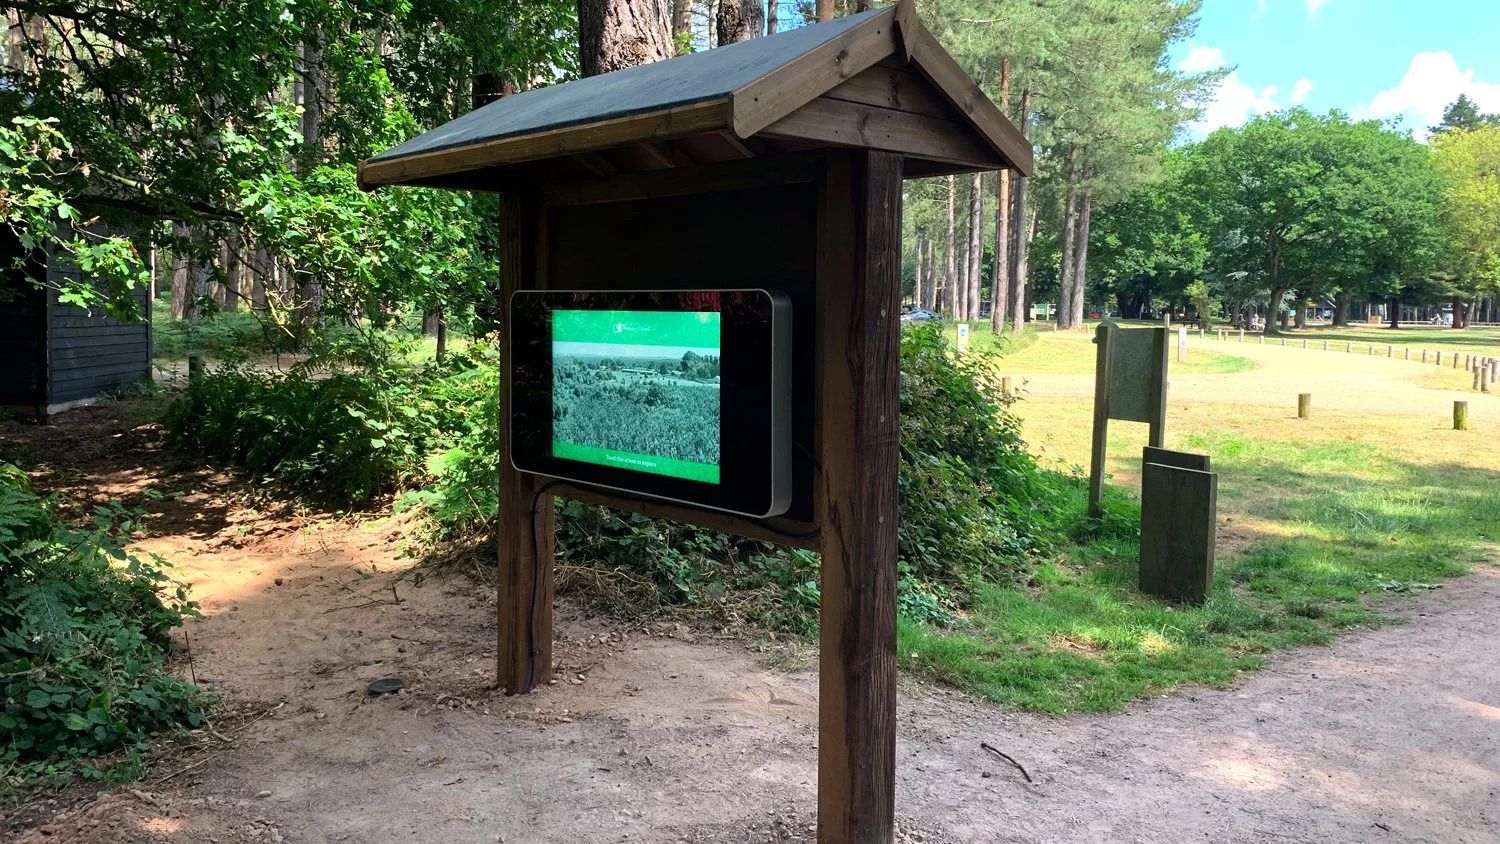 a wooden kiosk with a screen on it in a park .